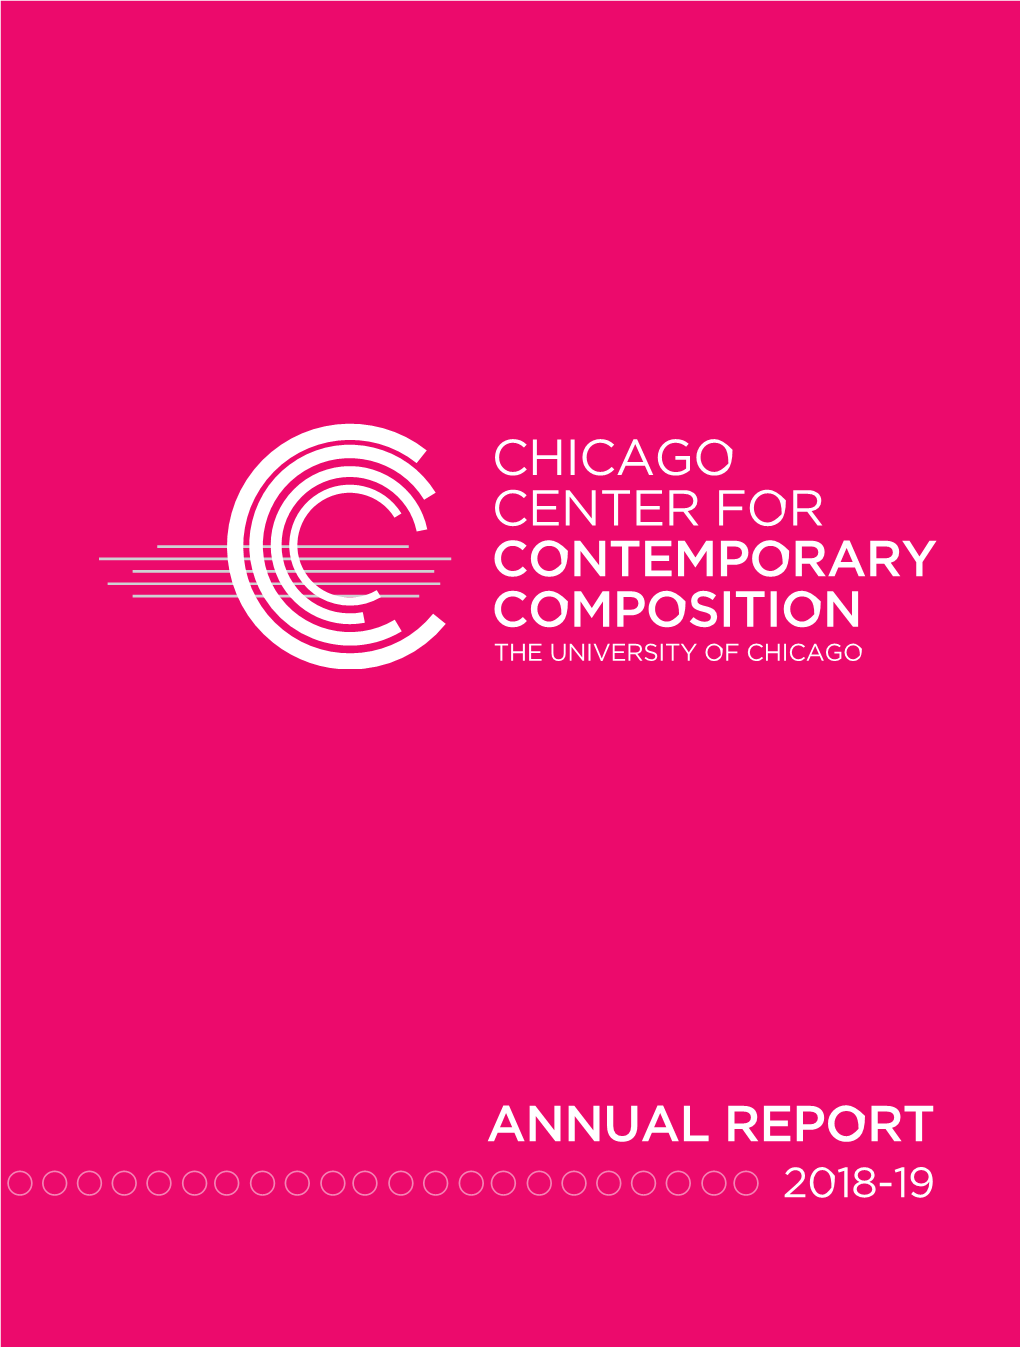 Chicago Center for Contemporary Composition the University of Chicago